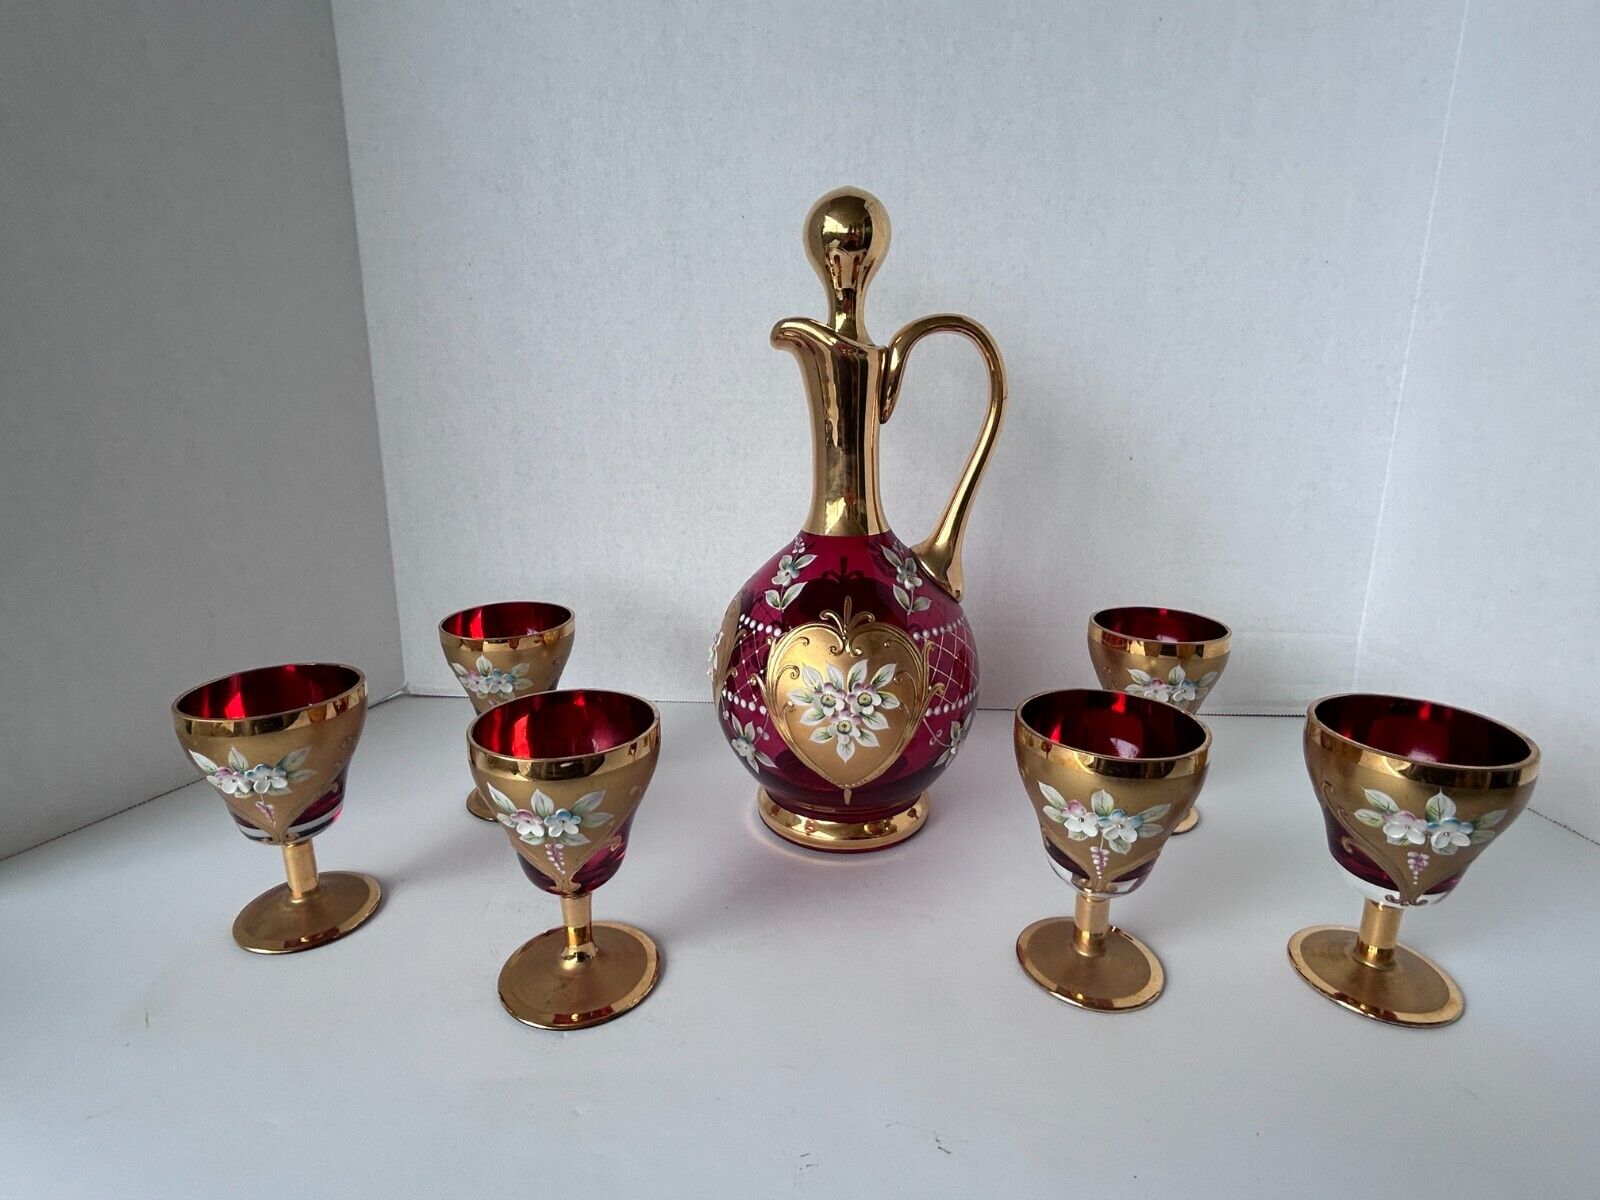 Vintage MOSER BOHEMIAN Ruby Glass Hand Painted GILT DECANTER & 6 WINE GLASSES